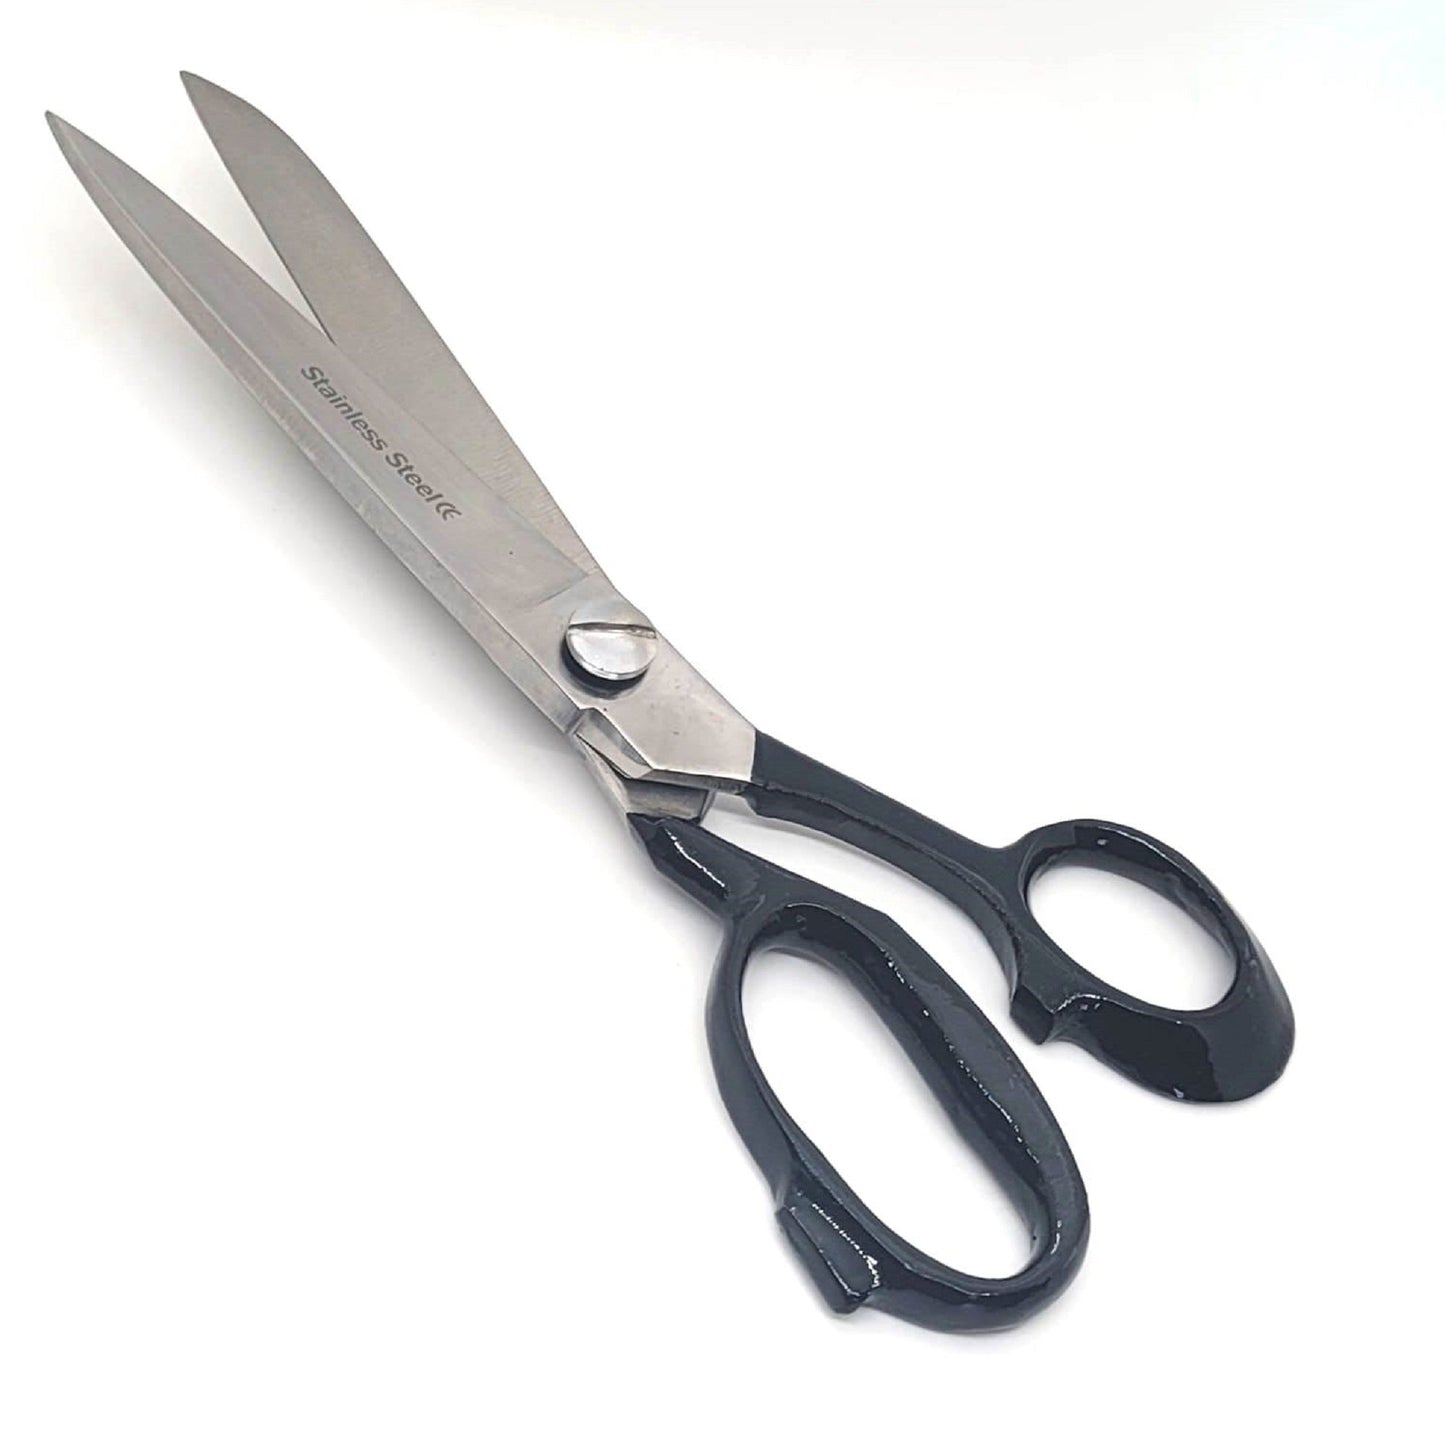 11" Heavy Duty Stainless Steel Tailor Scissors For Leather Upholstery Fabric Black Handle